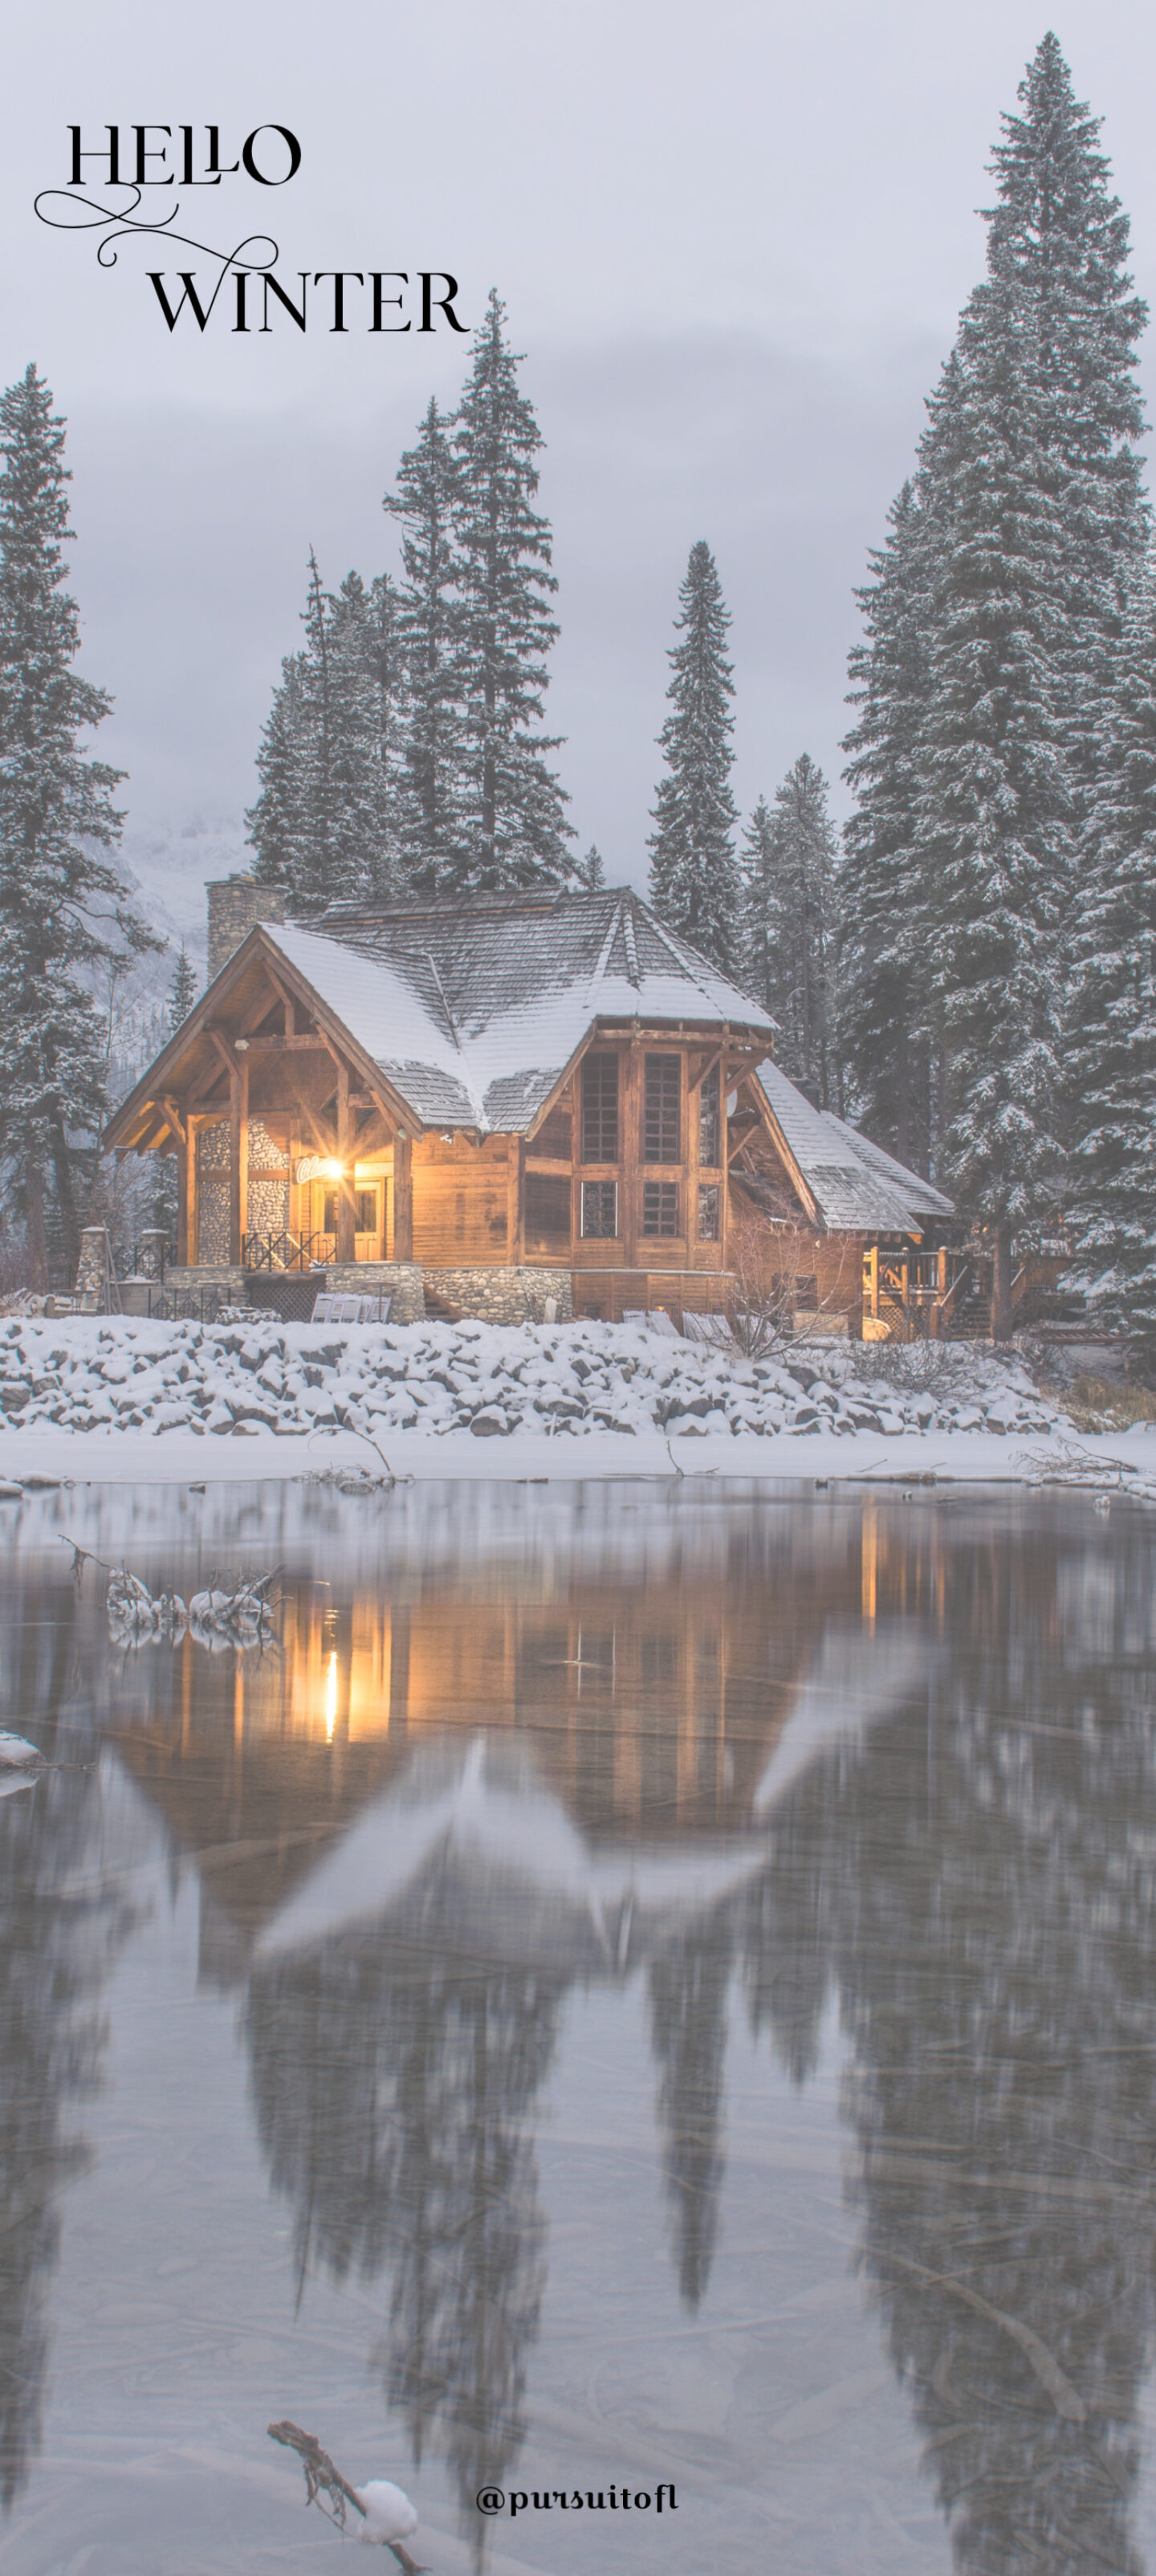 Winter phone wallpaper with log cabin on a lake in a snowy forest with hello winter text